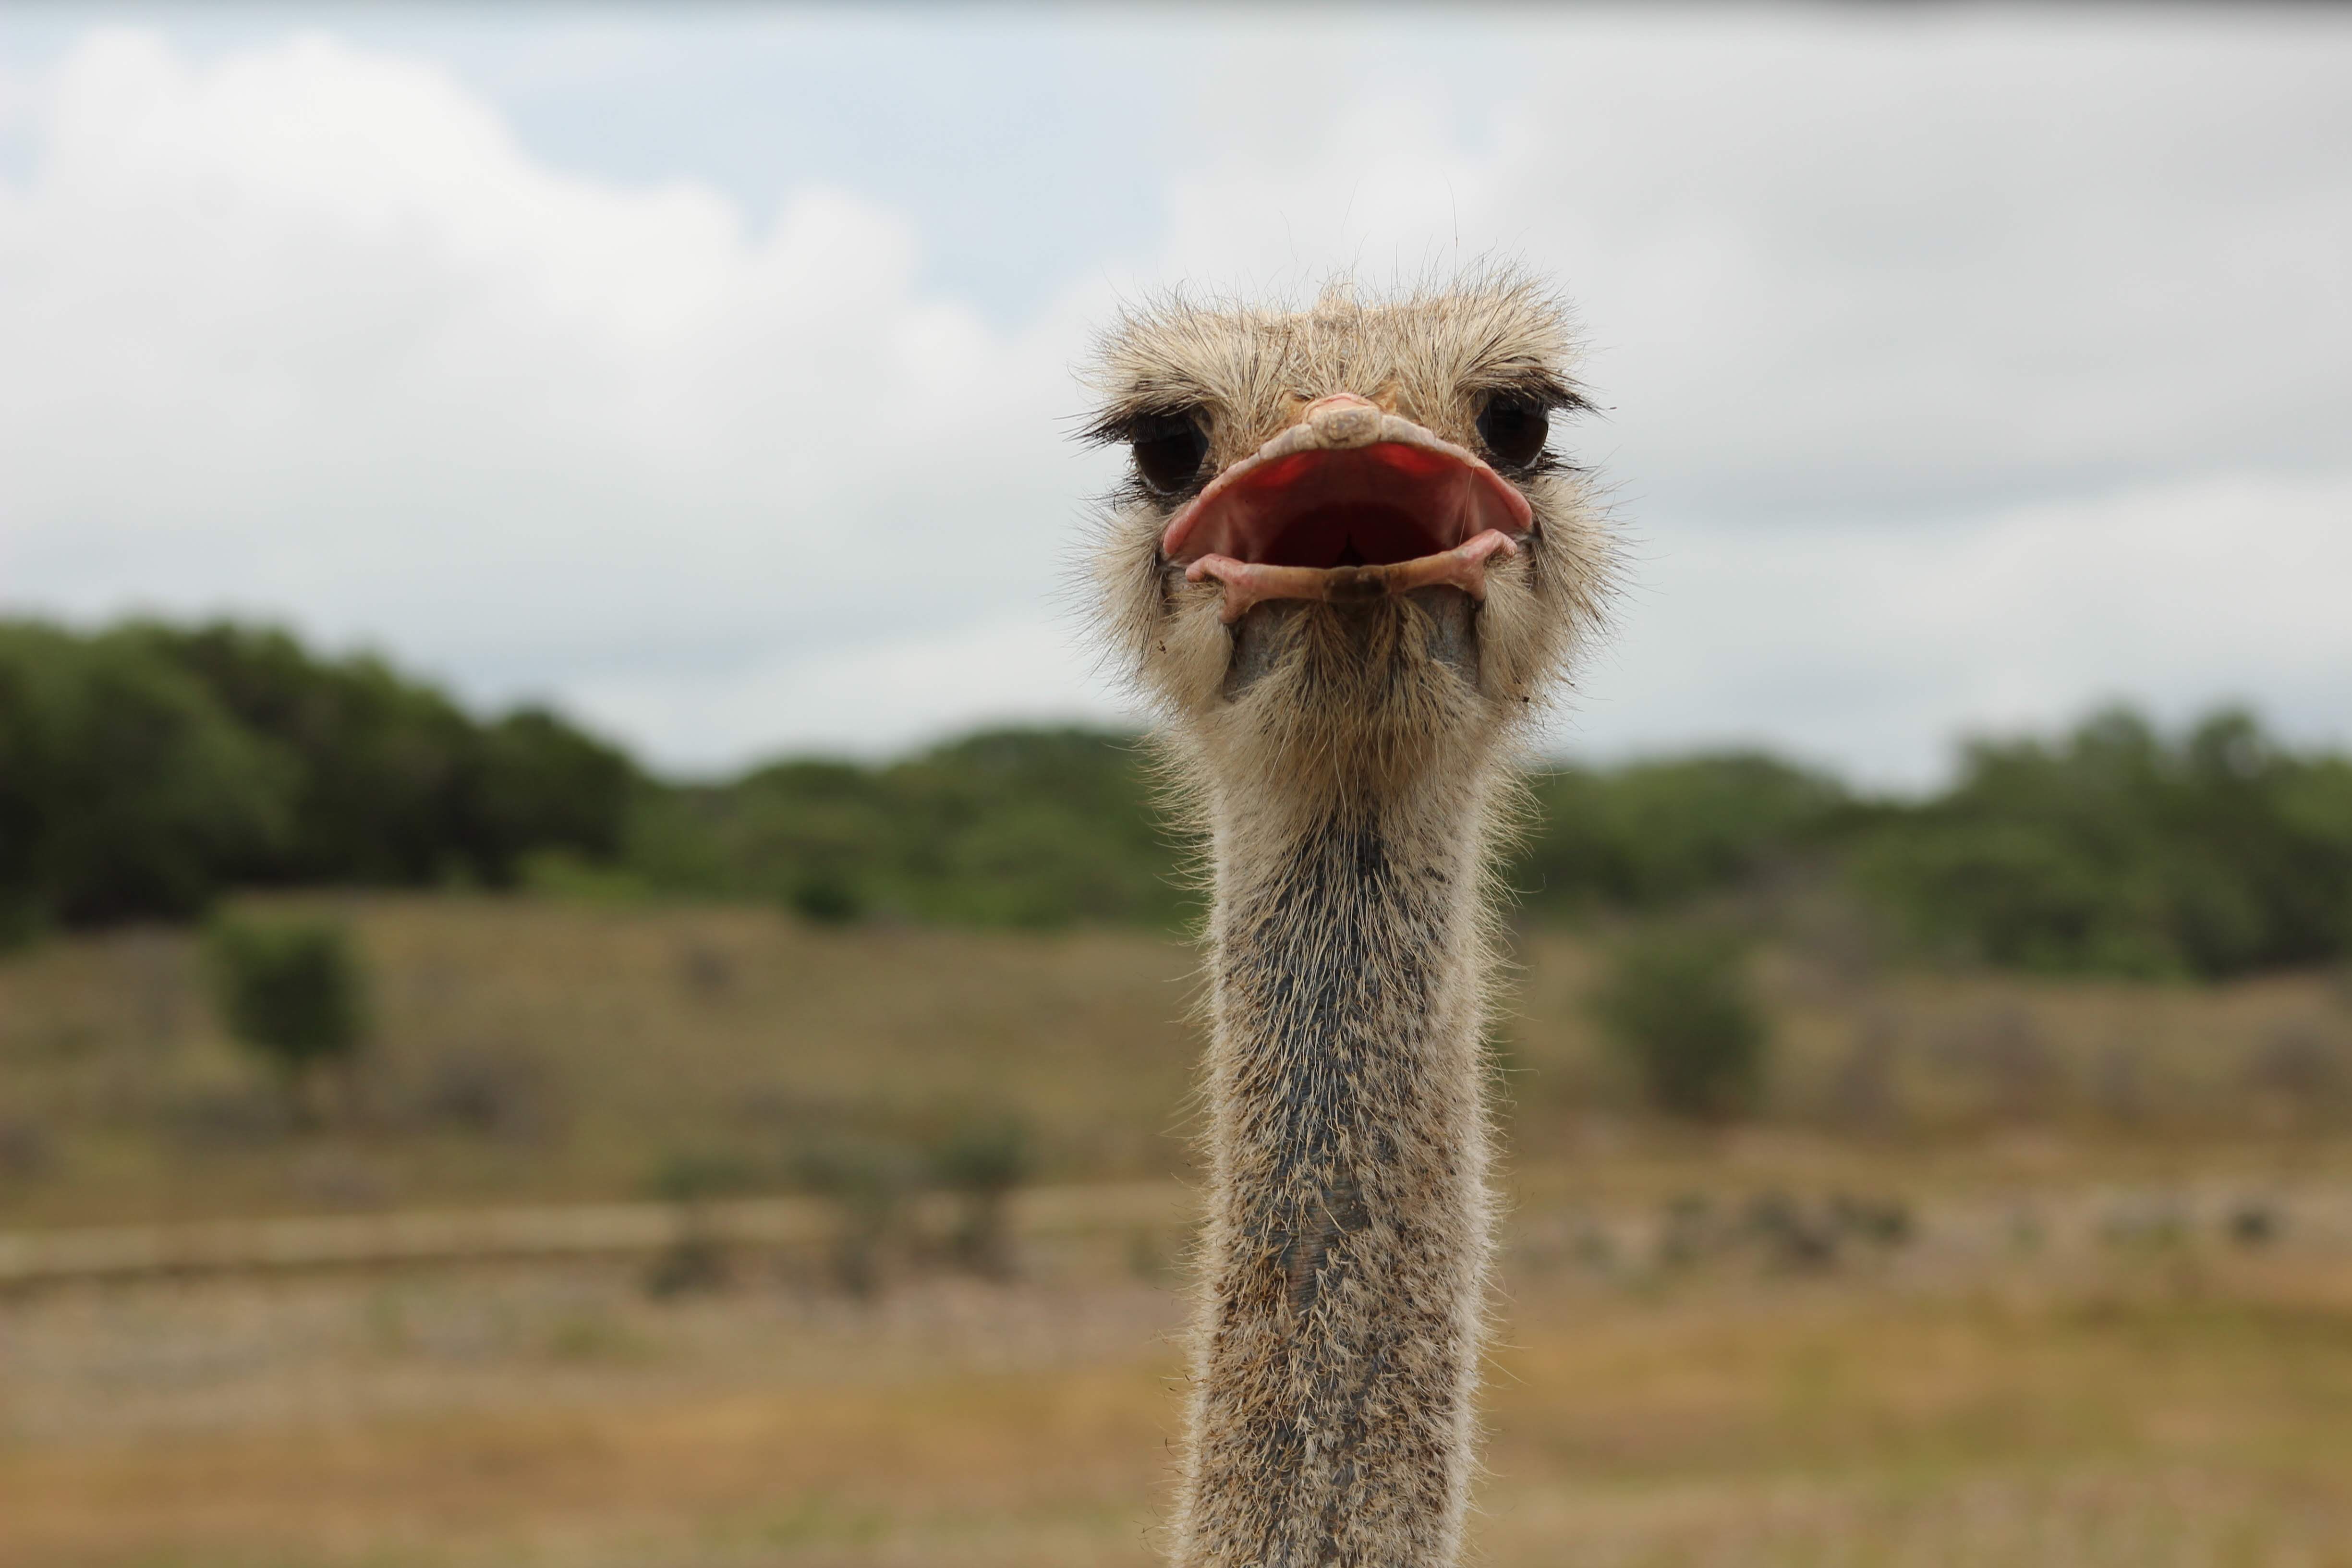 Get your head out of the sand! Ostriches are actually pretty amazing.